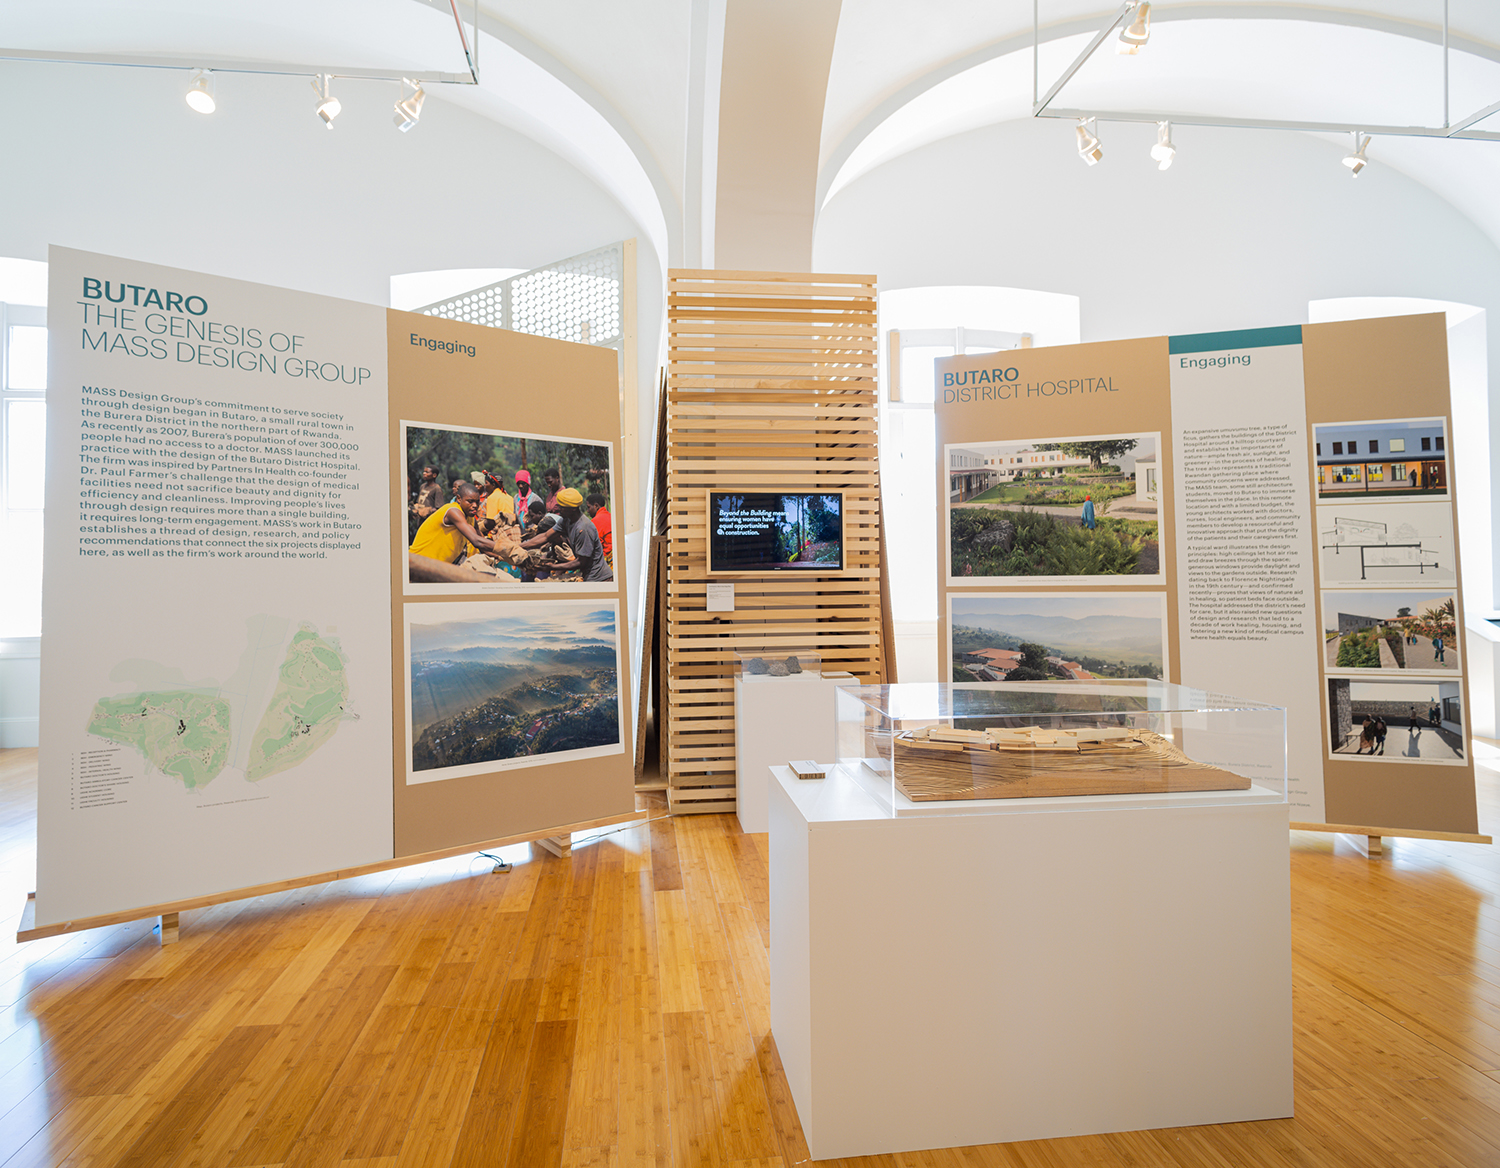 Exploration of MASS Design Group’s work on heathcare facilities in Butaro, Rwanda, forms the backbone of the exhibition.